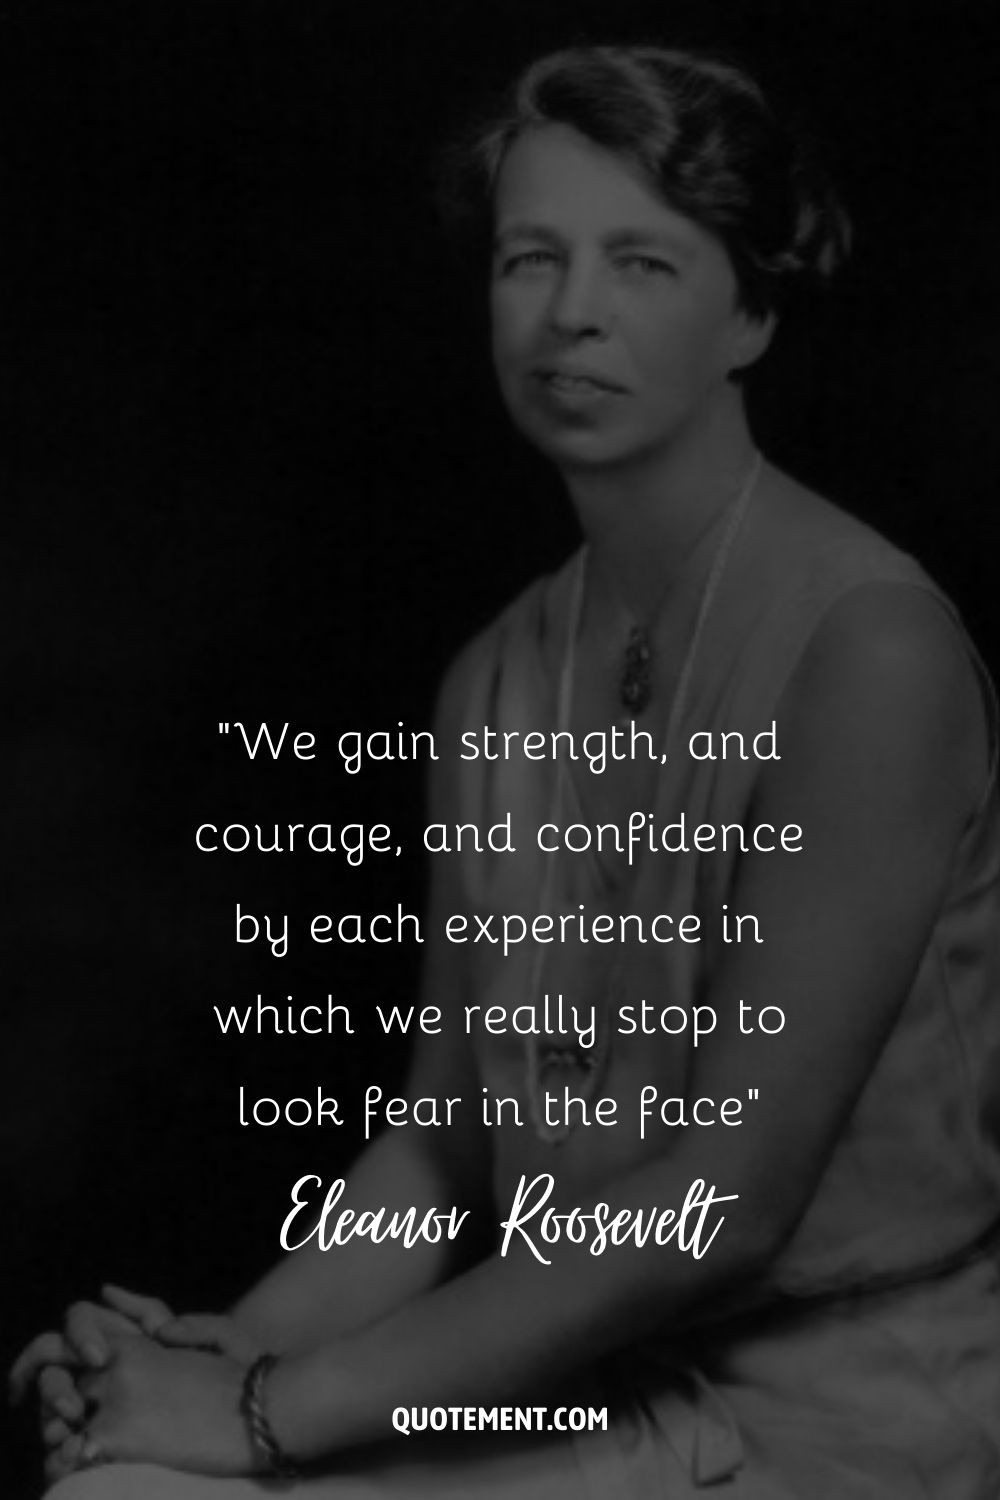 Image of Eleanor Roosevelt representing a quote on courage and fear.
